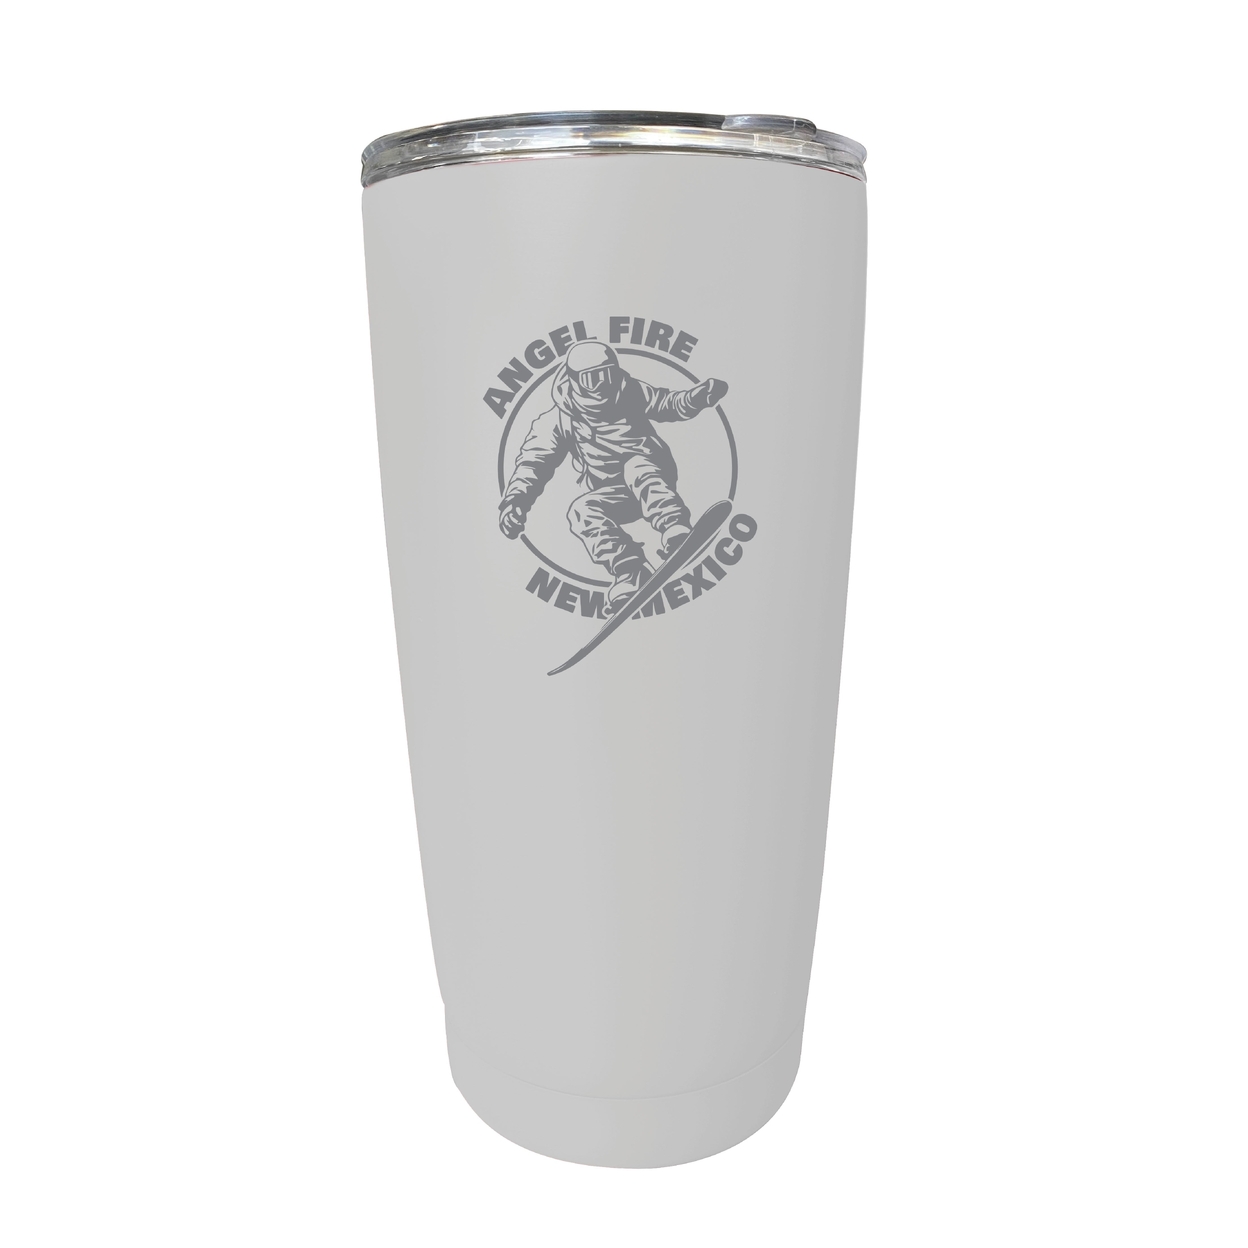 Angel Fire New Mexico Souvenir 16 Oz Engraved Stainless Steel Insulated Tumbler - White,,4-Pack